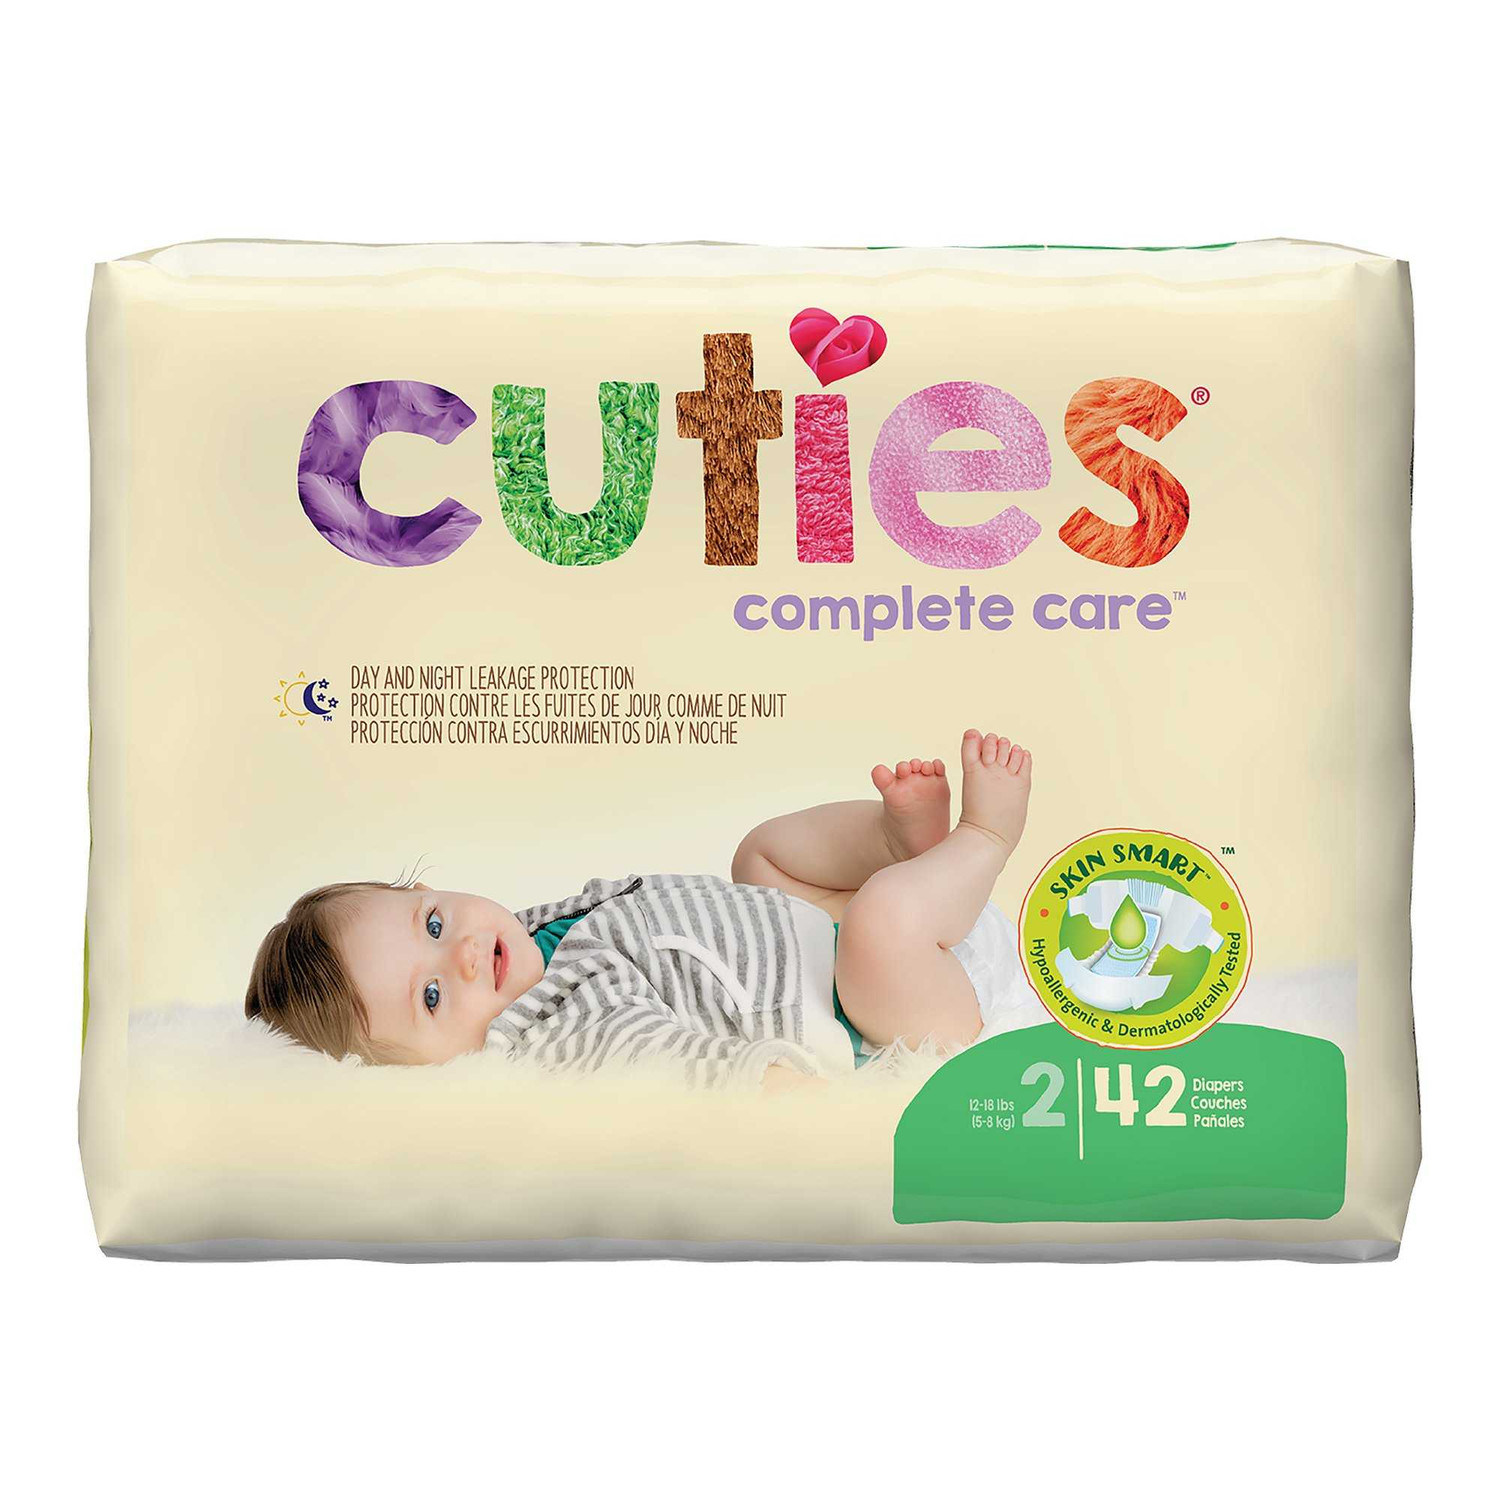 Comfees CMF-N Disposable Baby Diapers, Newborn - 4 pack, 42 count each